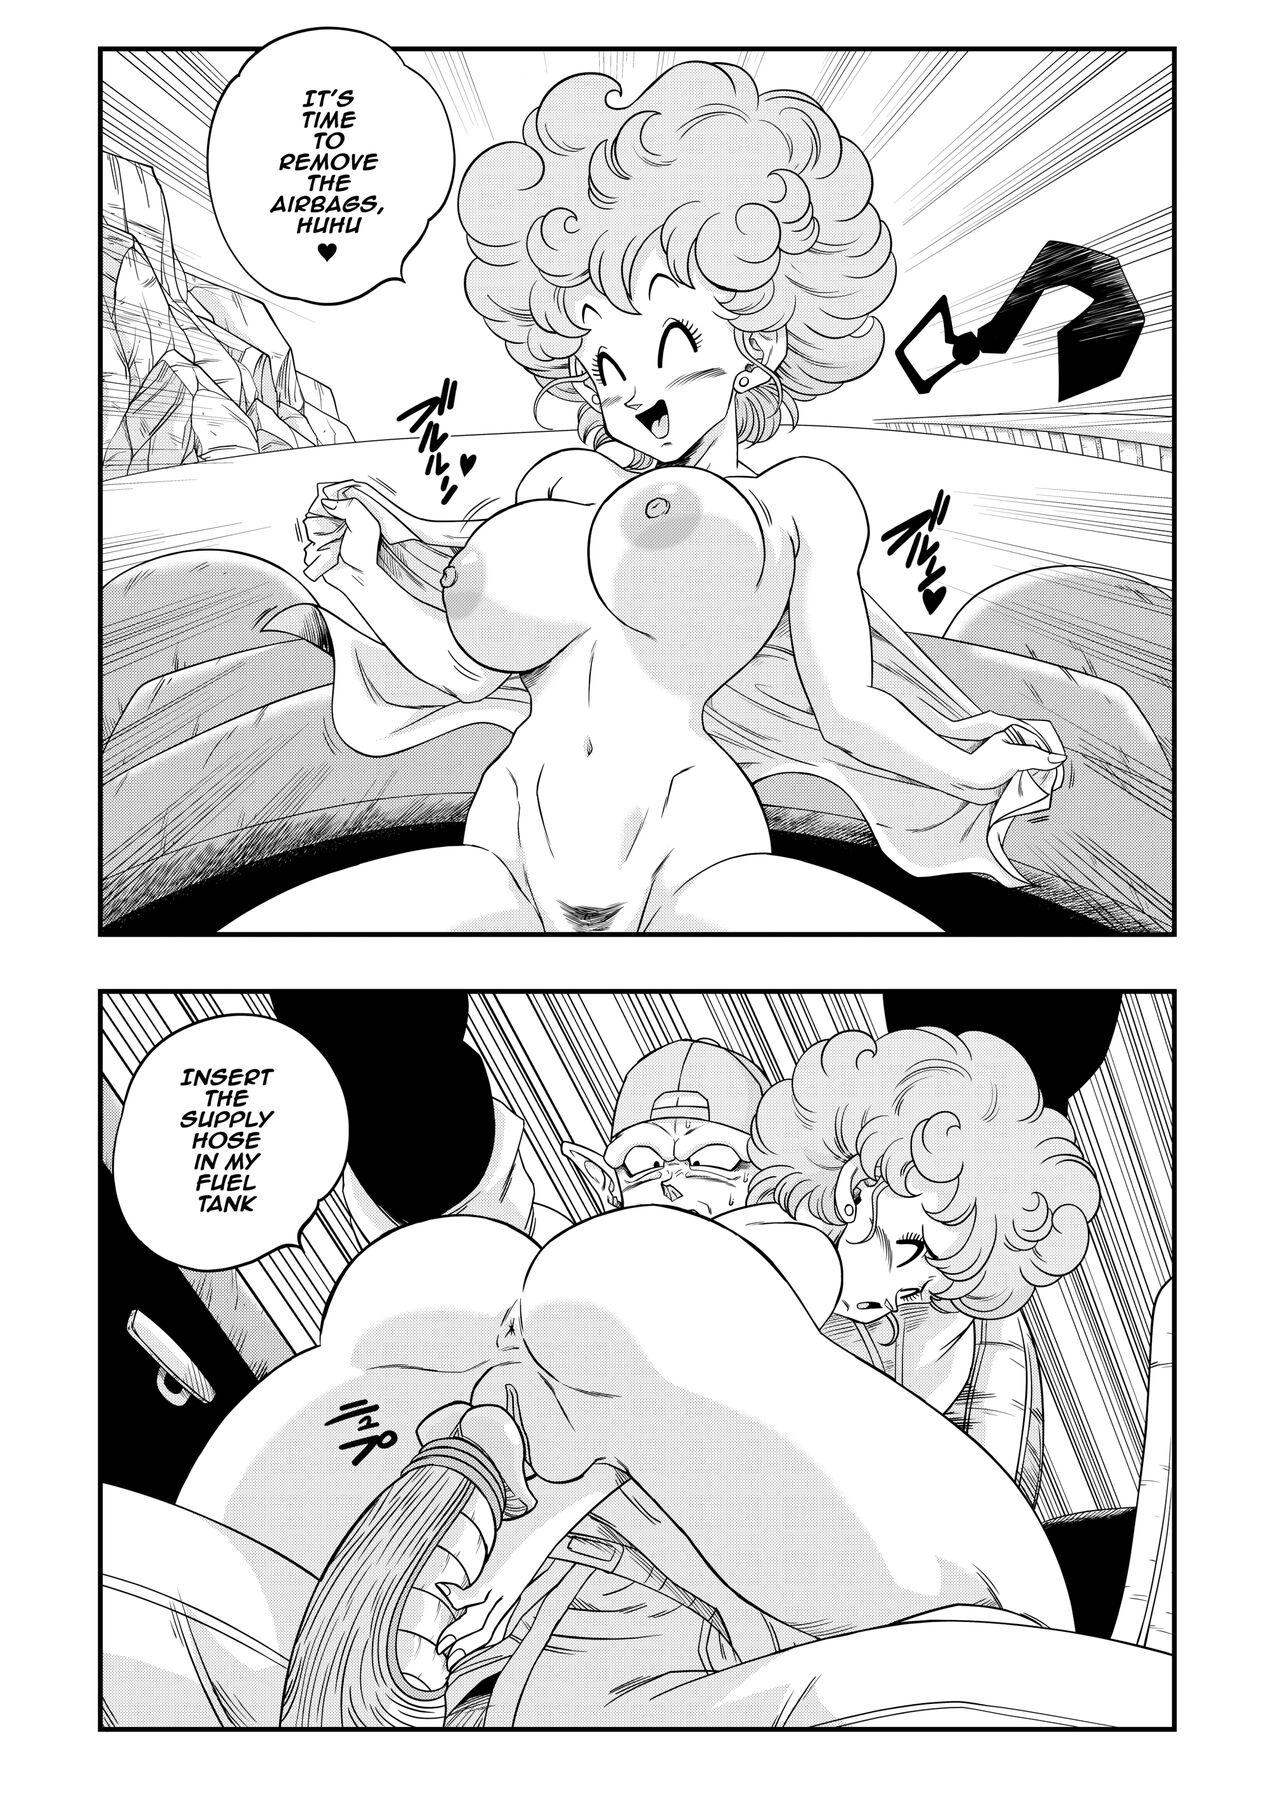 One Burning Road - Dragon ball z Dragon ball Gaygroupsex - Page 10